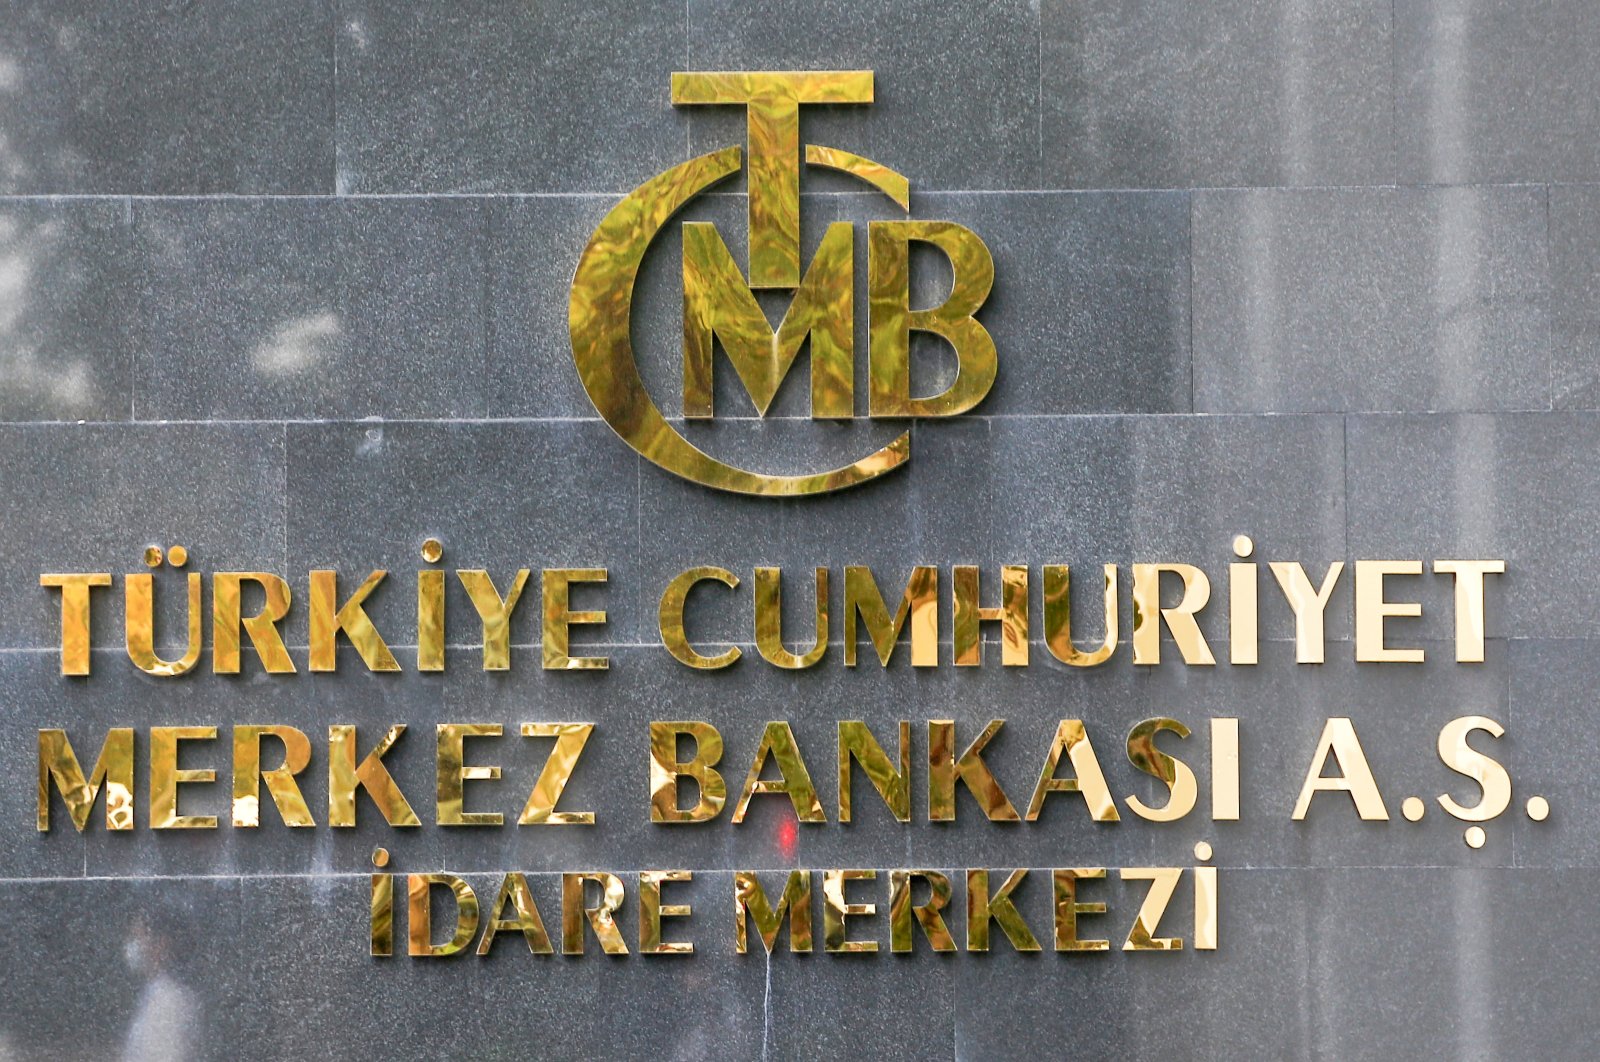 A logo of the Central Bank of the Republic of Turkey is pictured at the entrance of its headquarters in Ankara, Turkey, Oct. 15, 2021. (Reuters Photo)